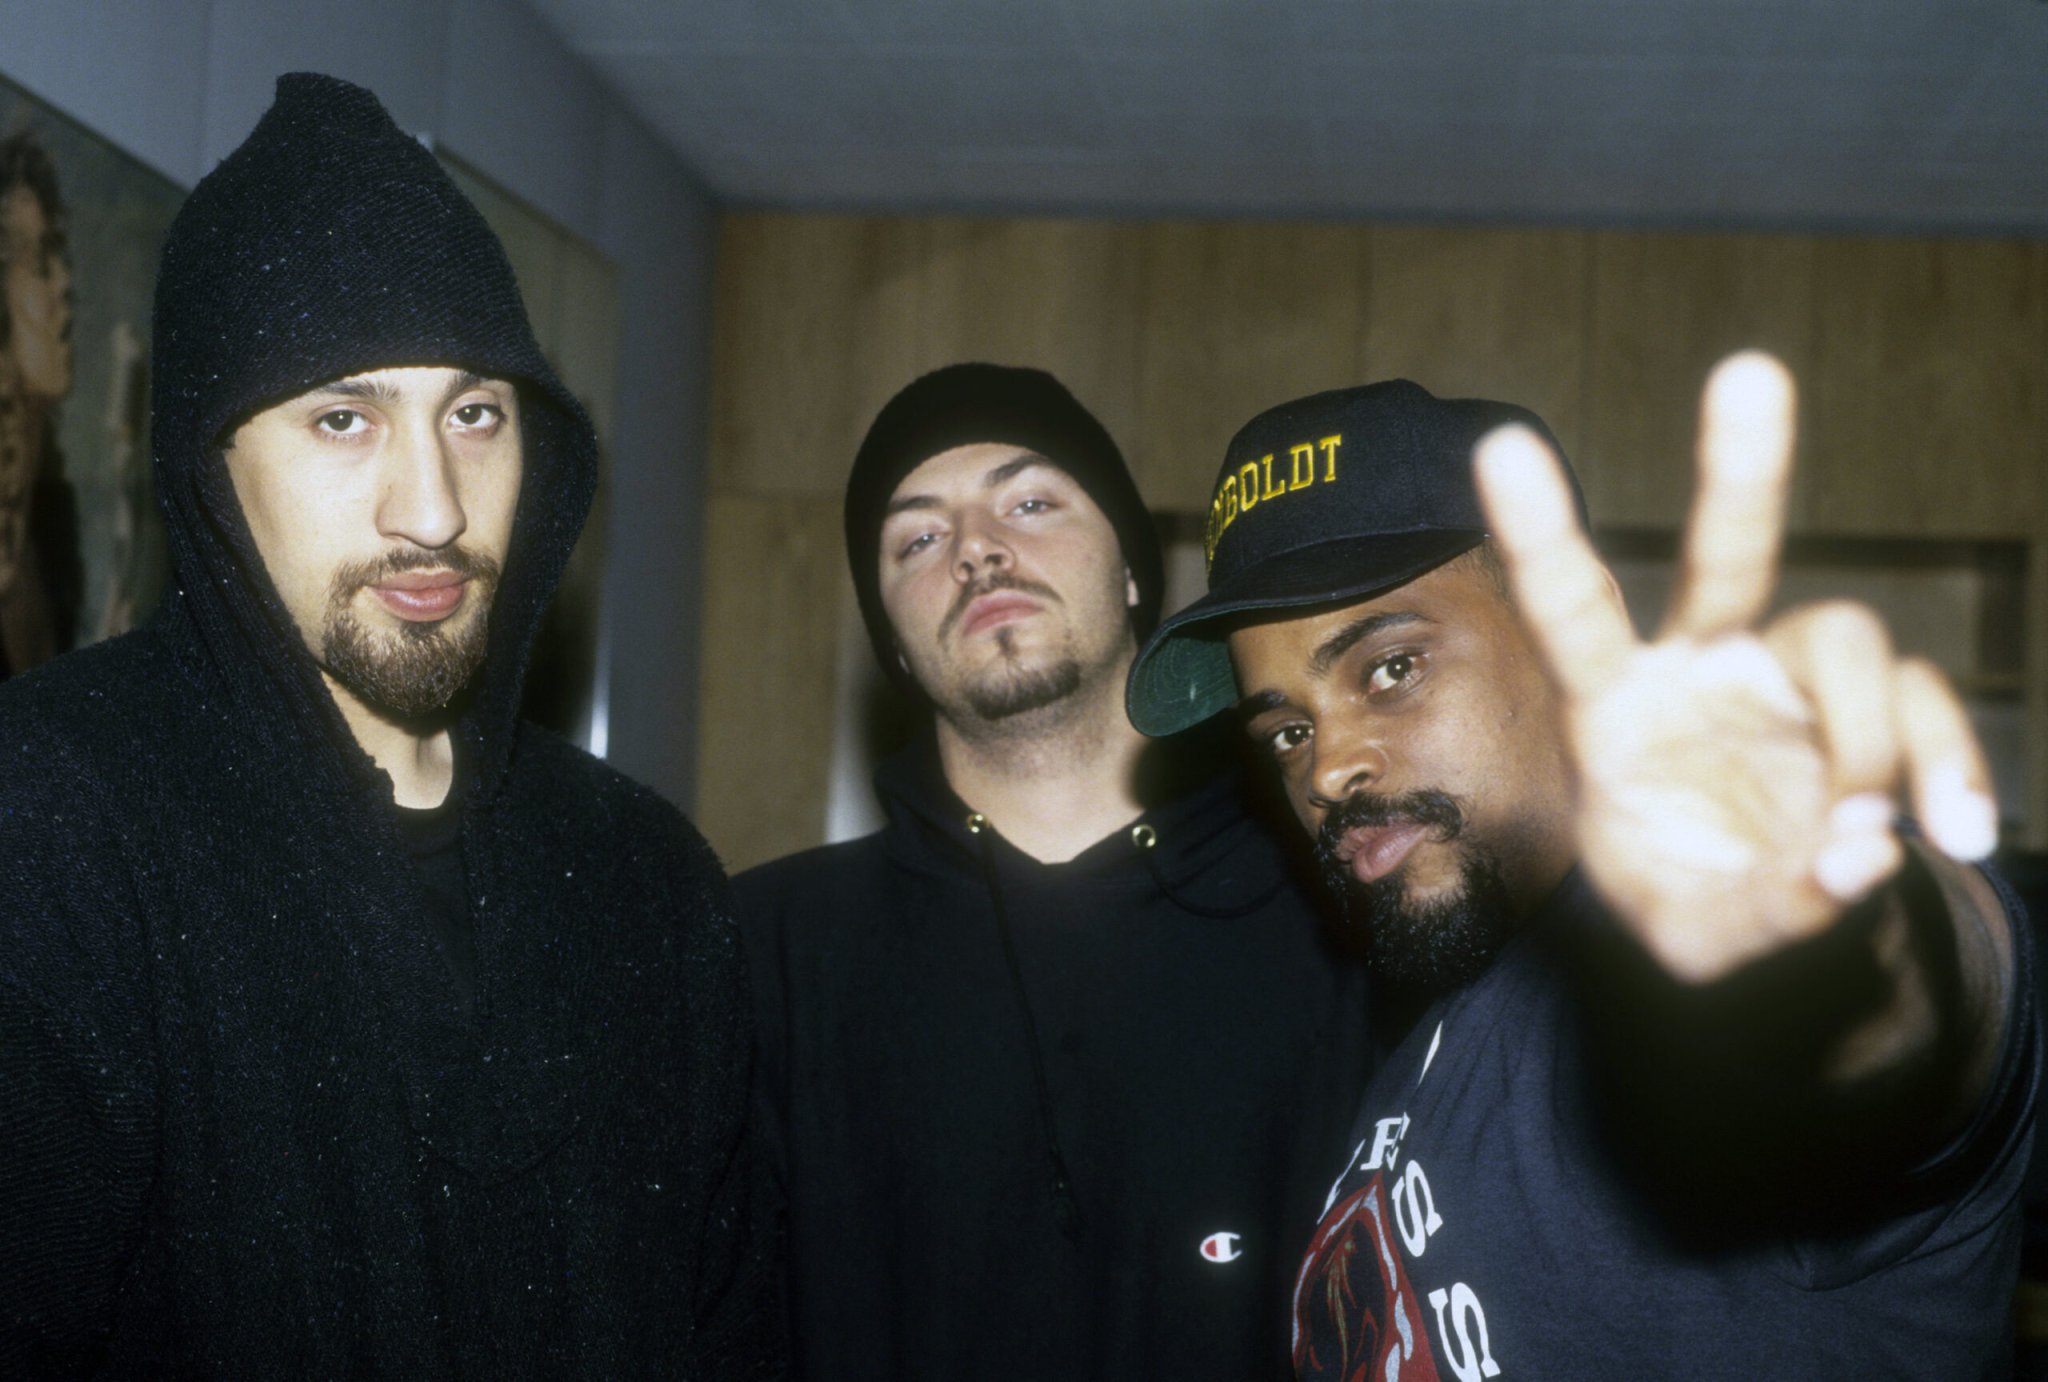 Cypress Hill Albums, Ranked